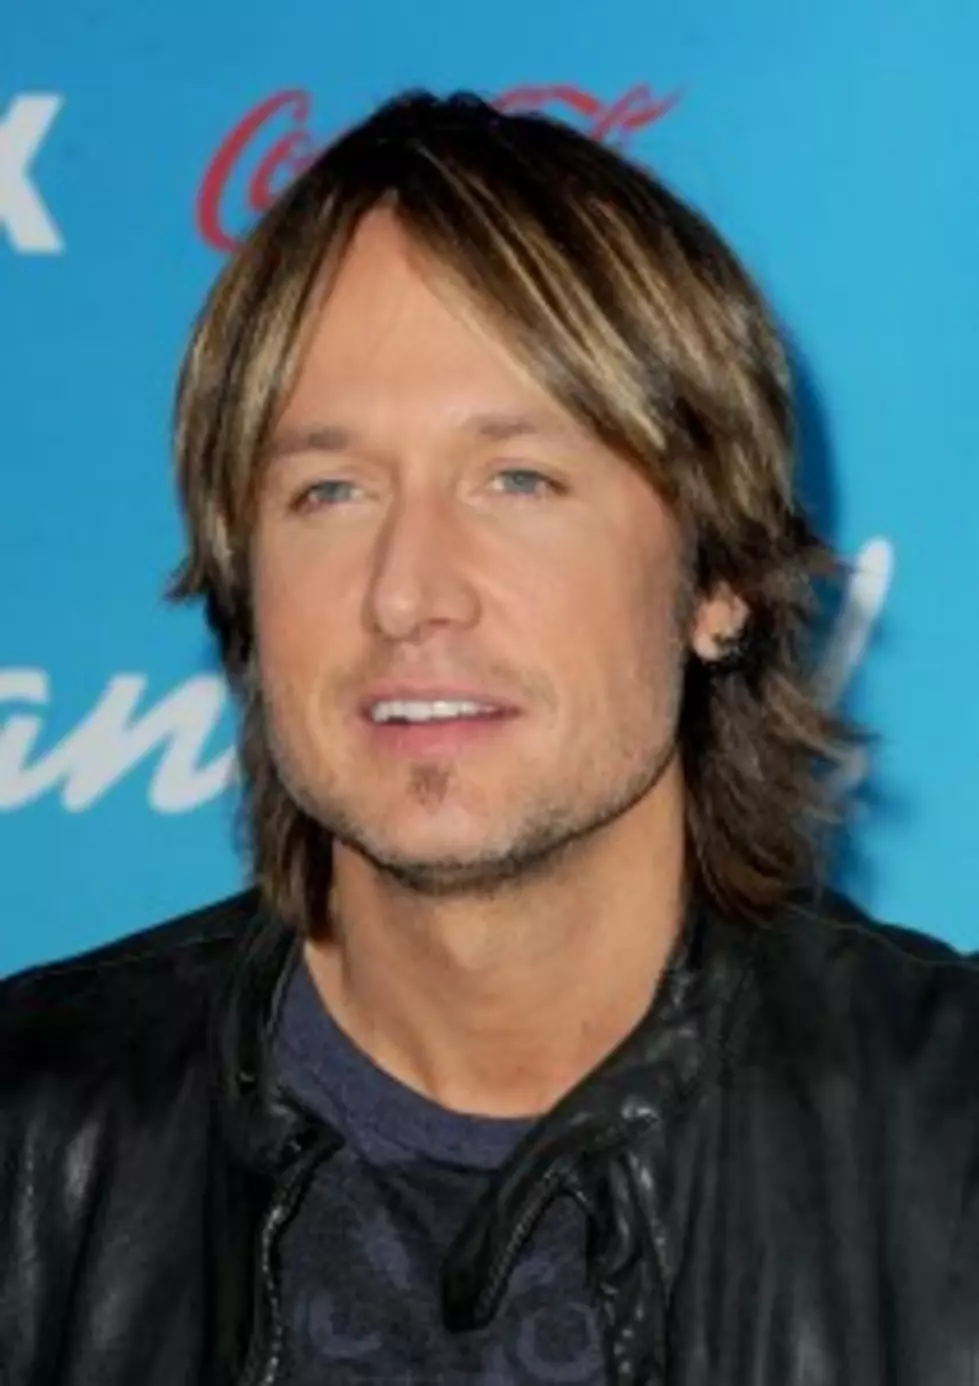 Keith Urban Coming to St. Louis